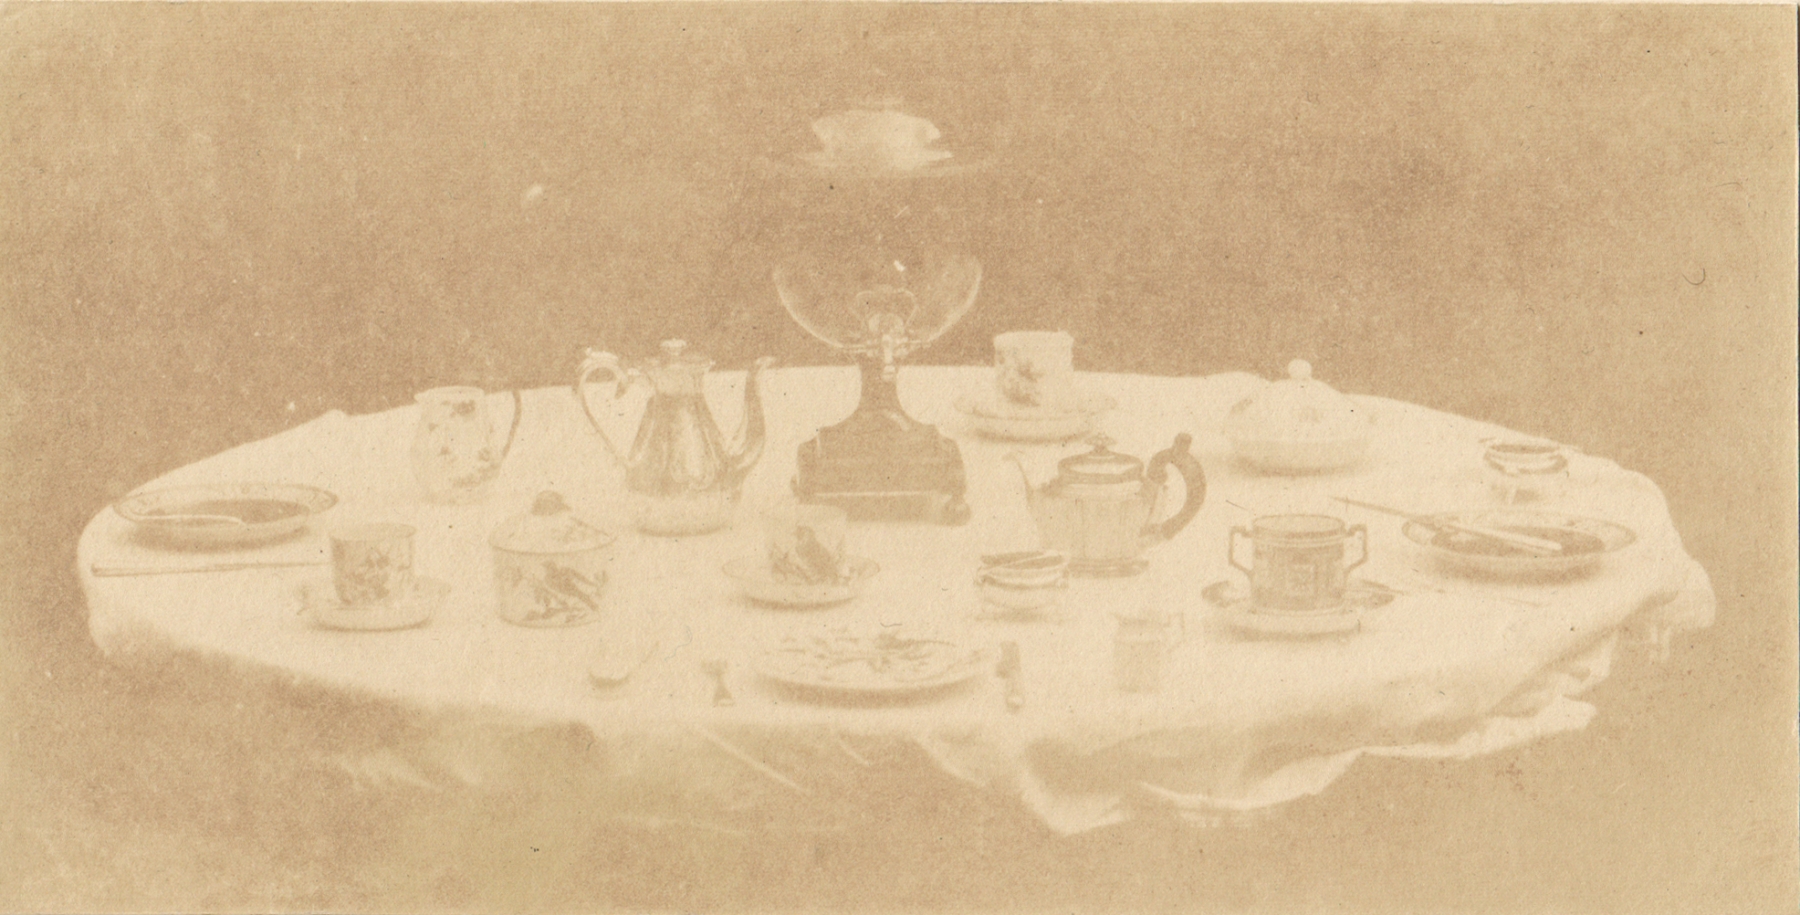 William Henry Fox TALBOT (English, 1800-1877) Table set for tea, 1841-1842 Varnished salt print from a calotype negative 8.5 x 16.8 cm mounted on card, ruled  "Patent Talbotype Photogenic Drawing" label on mount verso